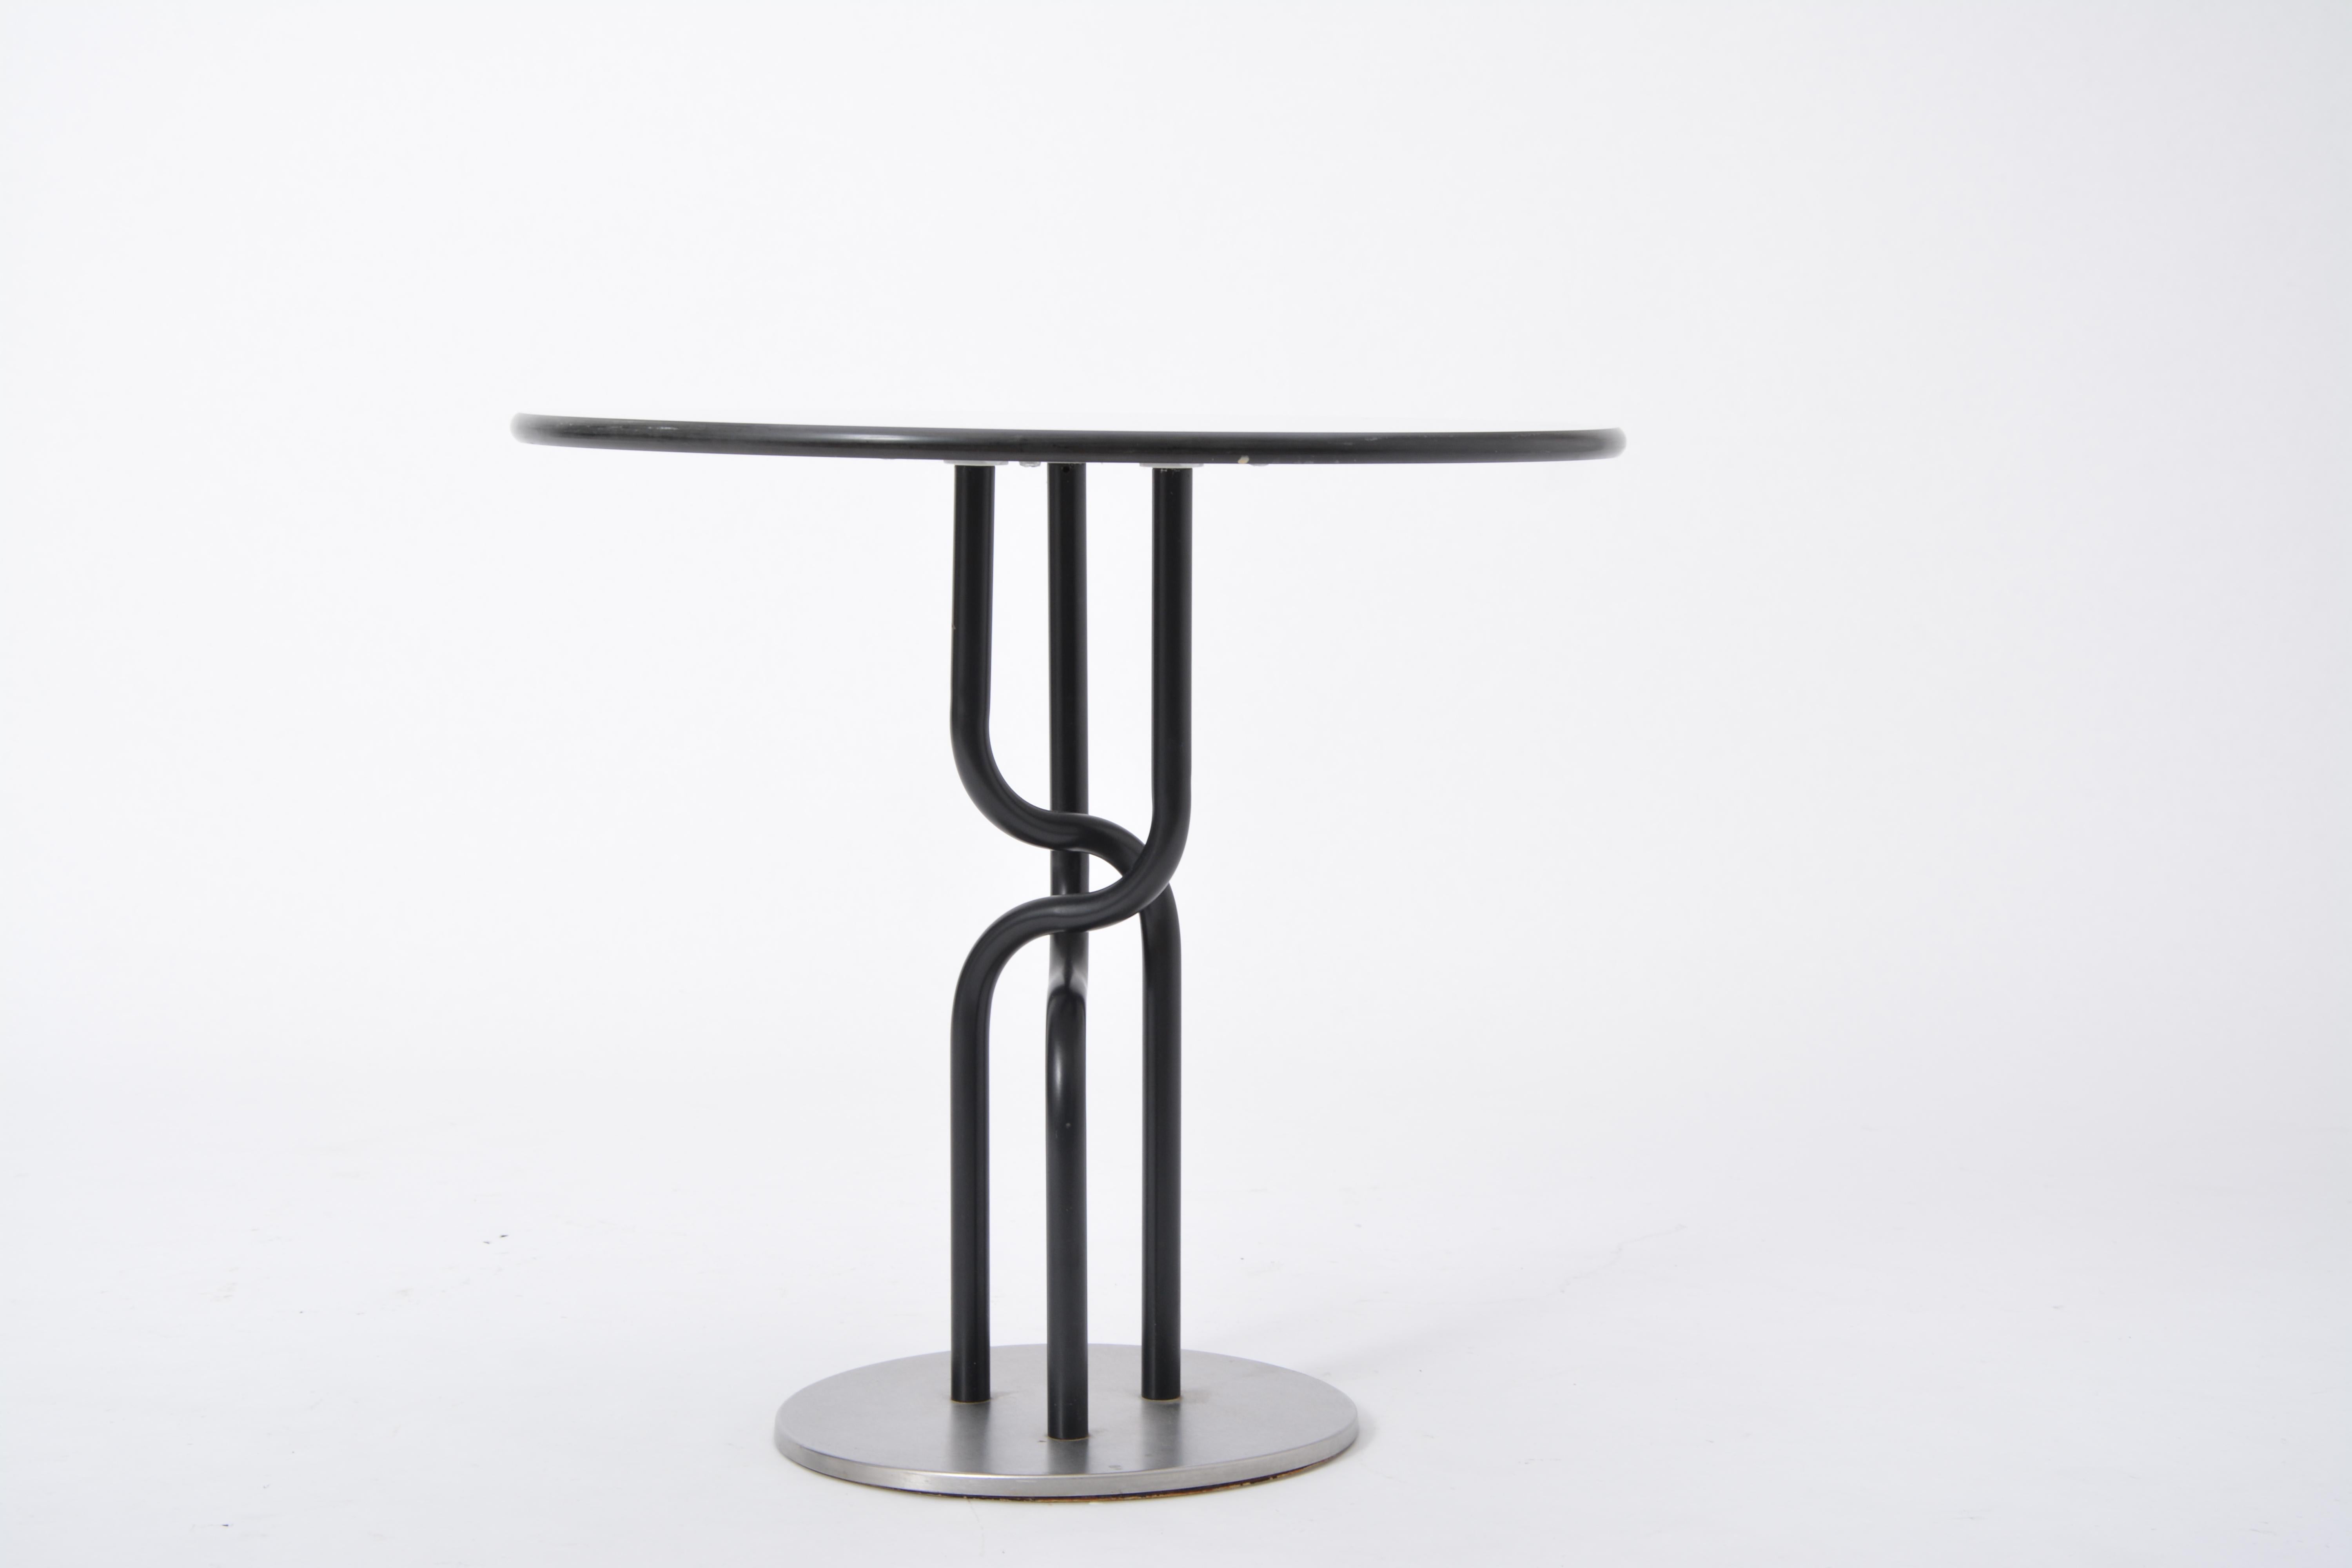 Danish Post-Modern side table by Rud Thygesen and Johnny Sorensen for Botium
- Round coffee table designed by Rud Thygesen and Johnny Sørensen
- Produced by Botium in Denmark in 1989
- The table has a white laminate tabletop
- Black lacquered steel